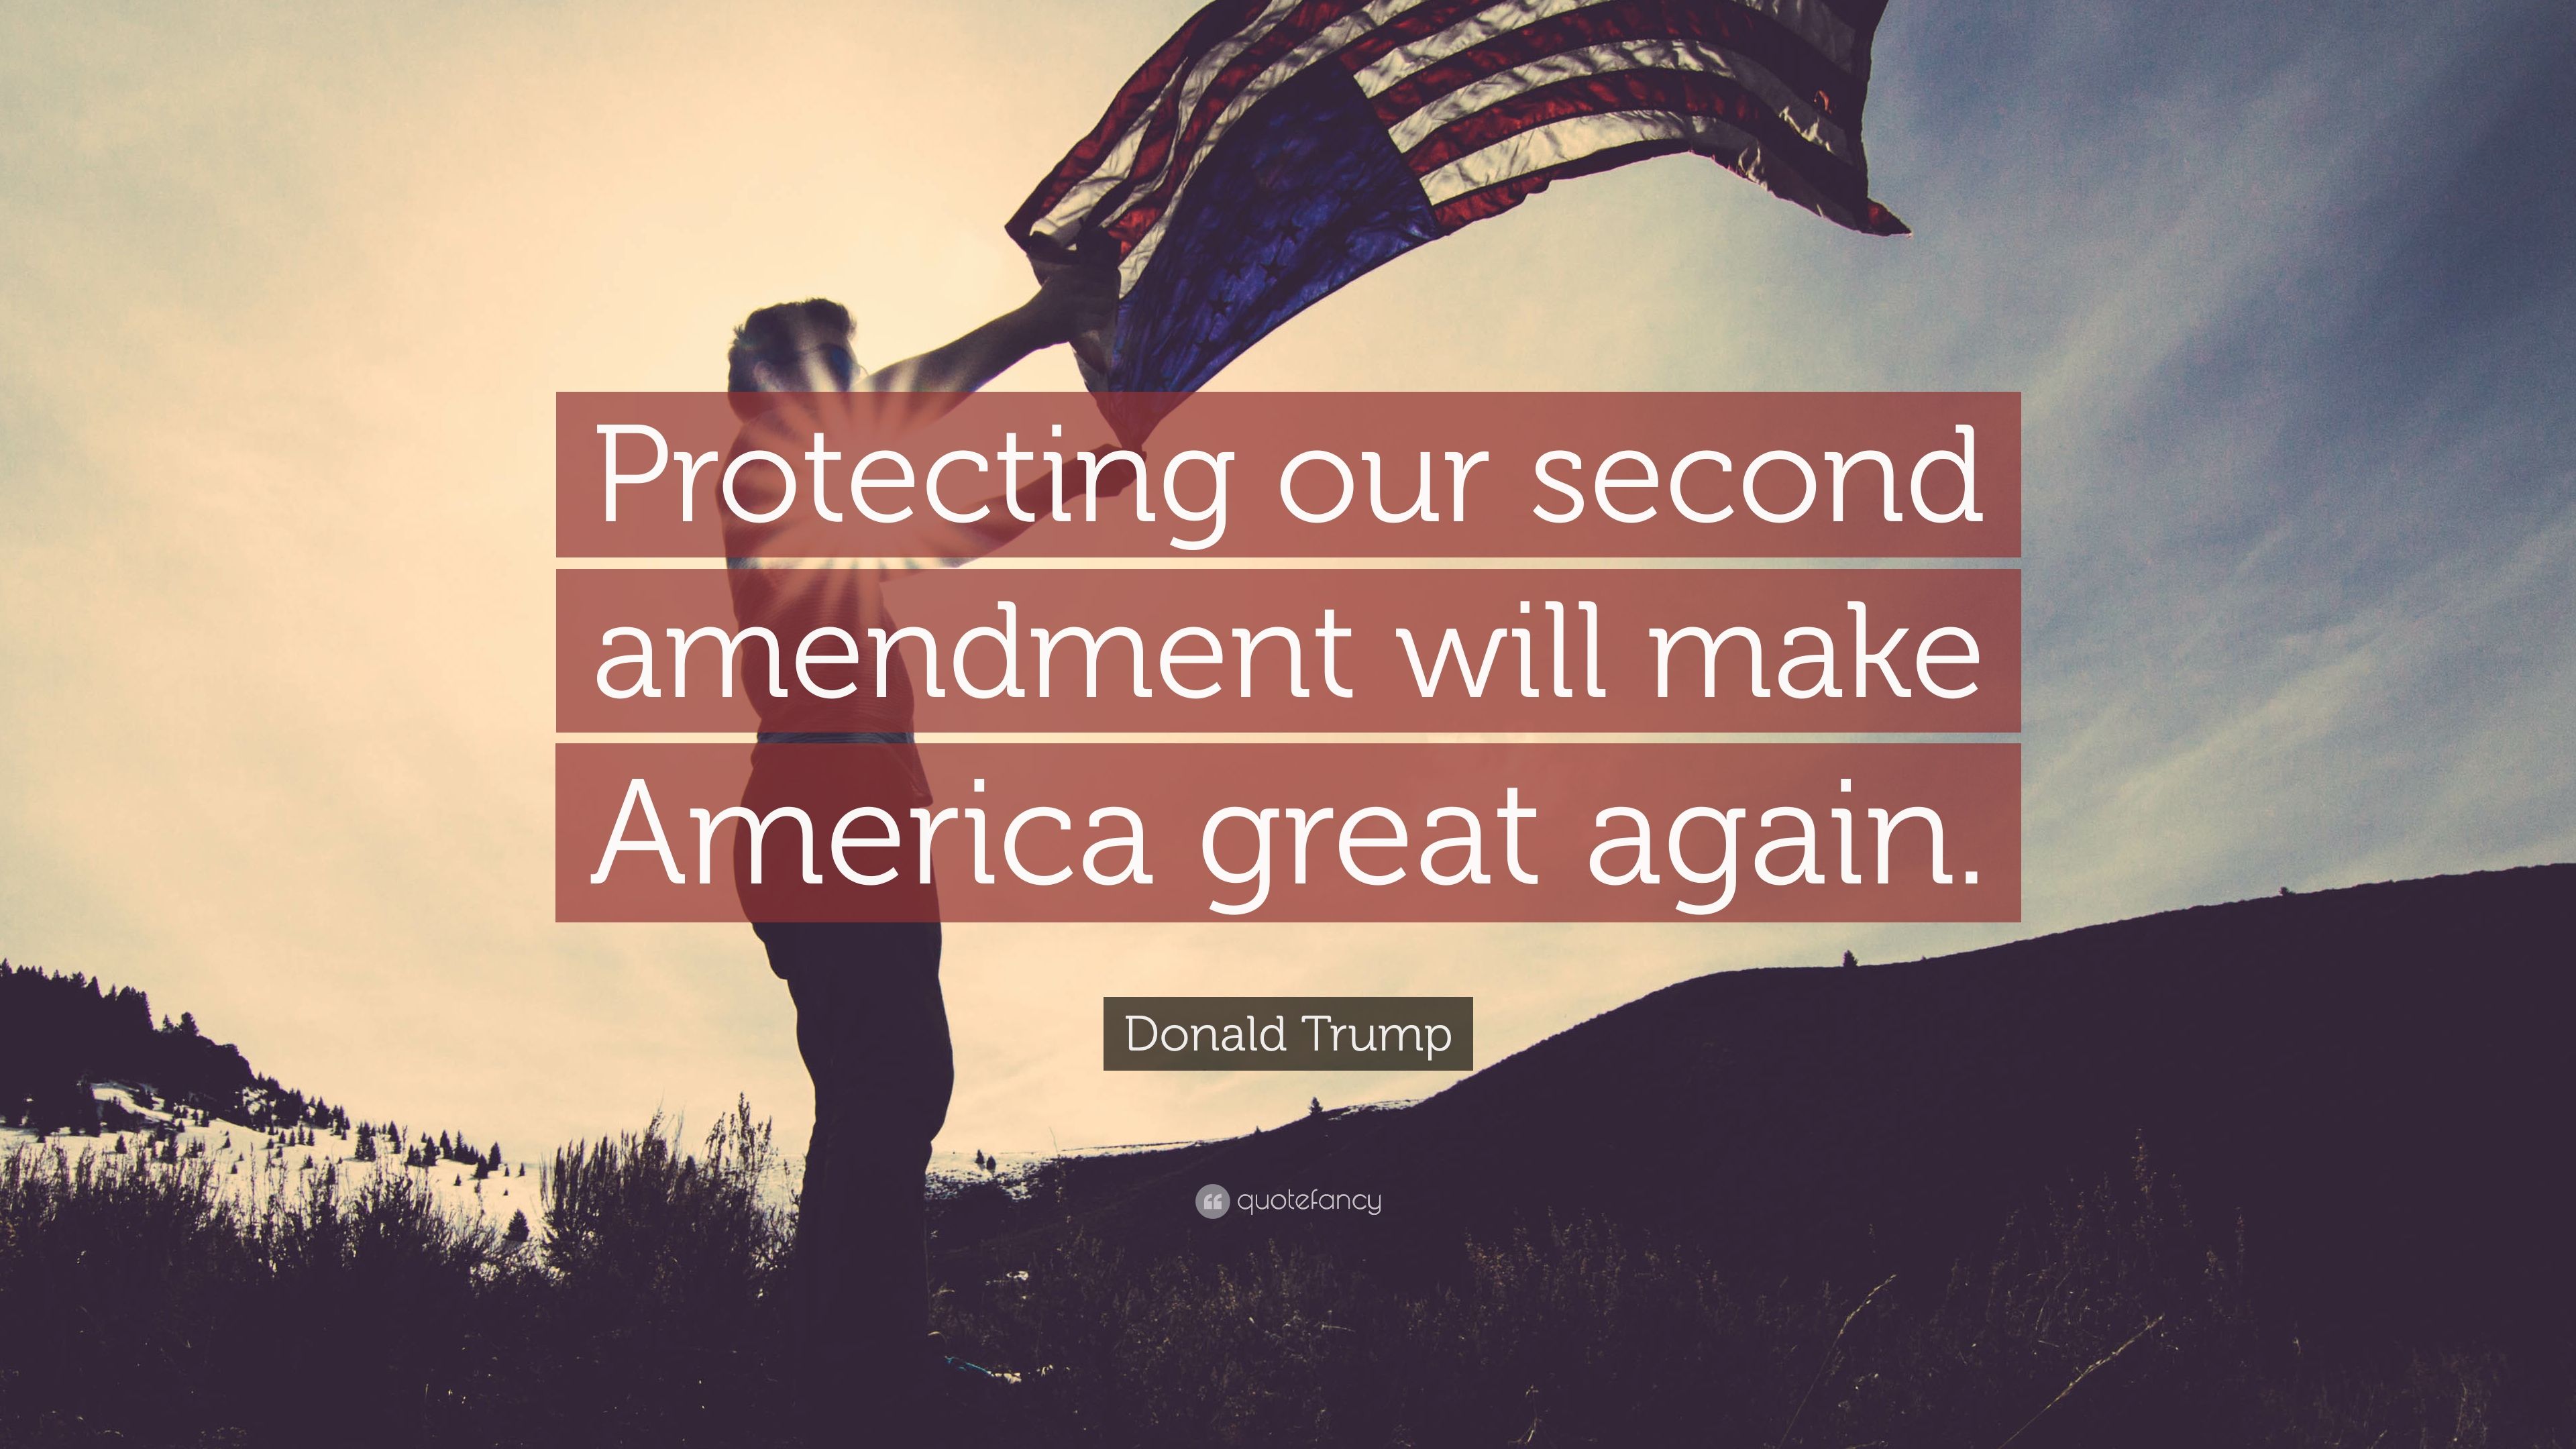 Donald Trump Quote: “Protecting our second amendment will make